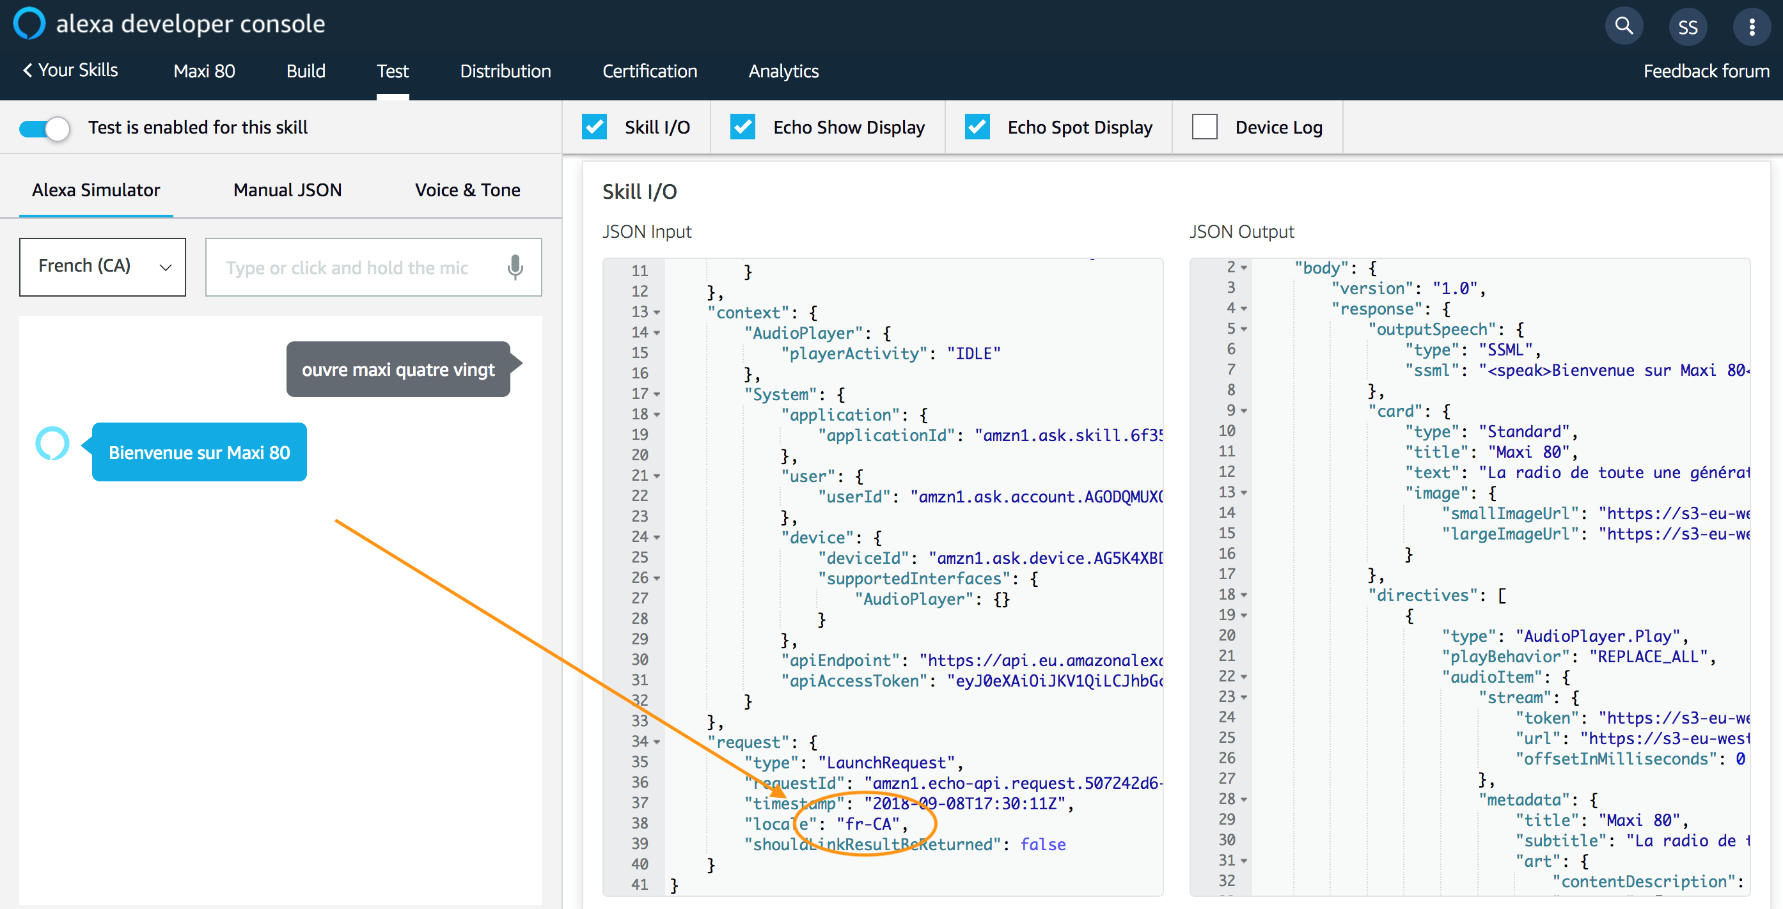 Screenshot of alexa developer console for Skill I/O with arrow marking
                     locale  in JSON input.